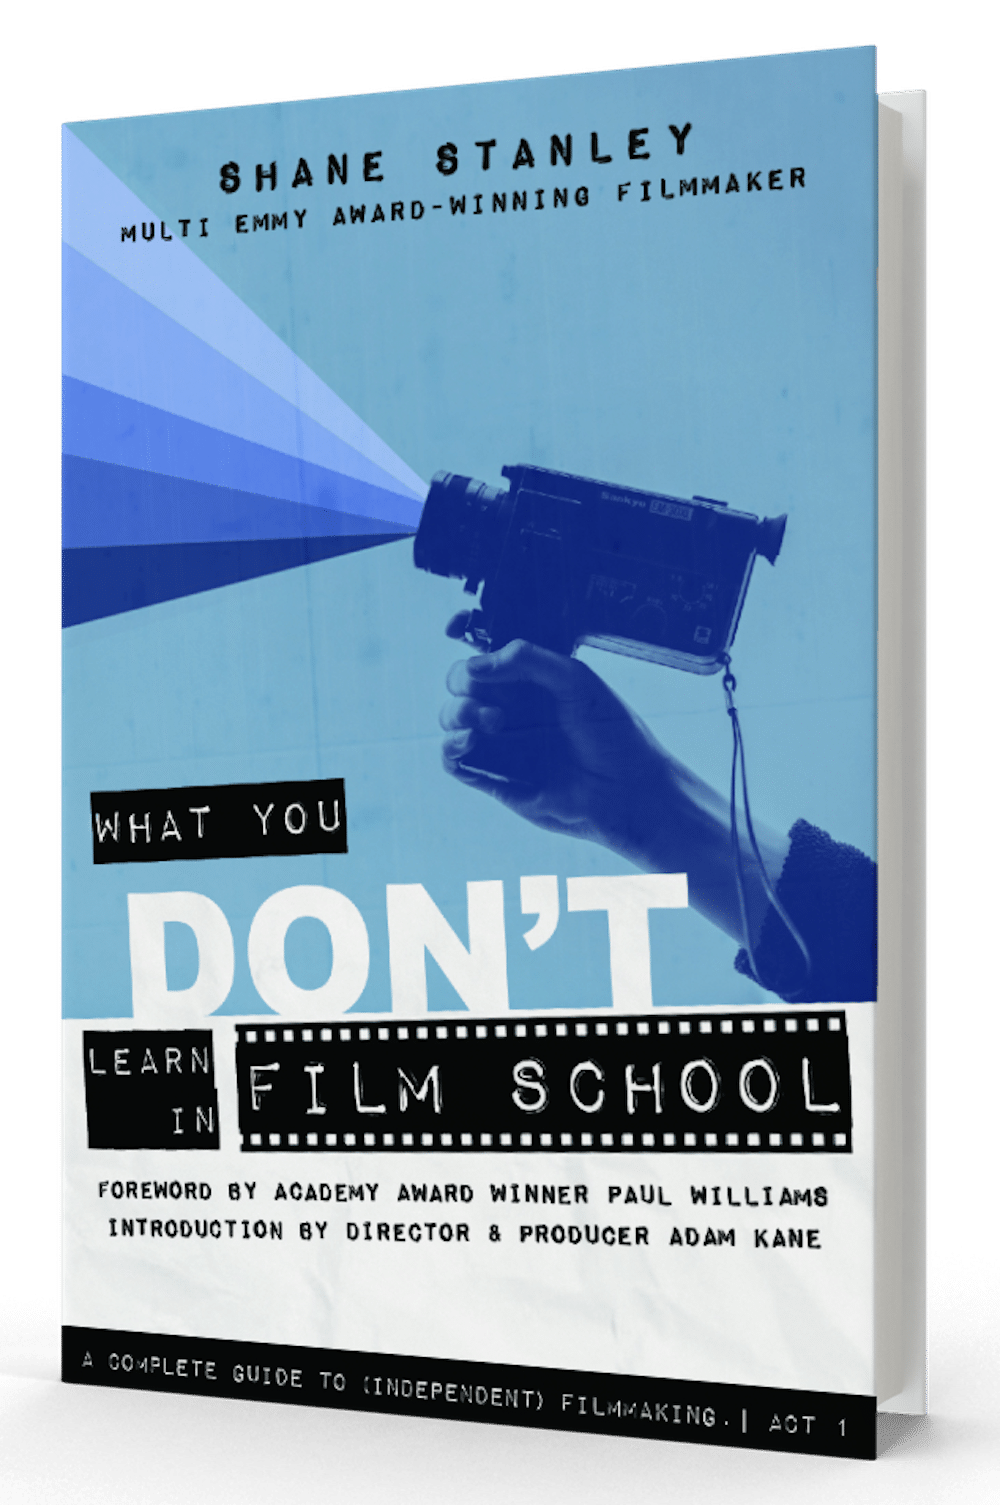 What You Don't Learn in Film School, Author Shane Stanley